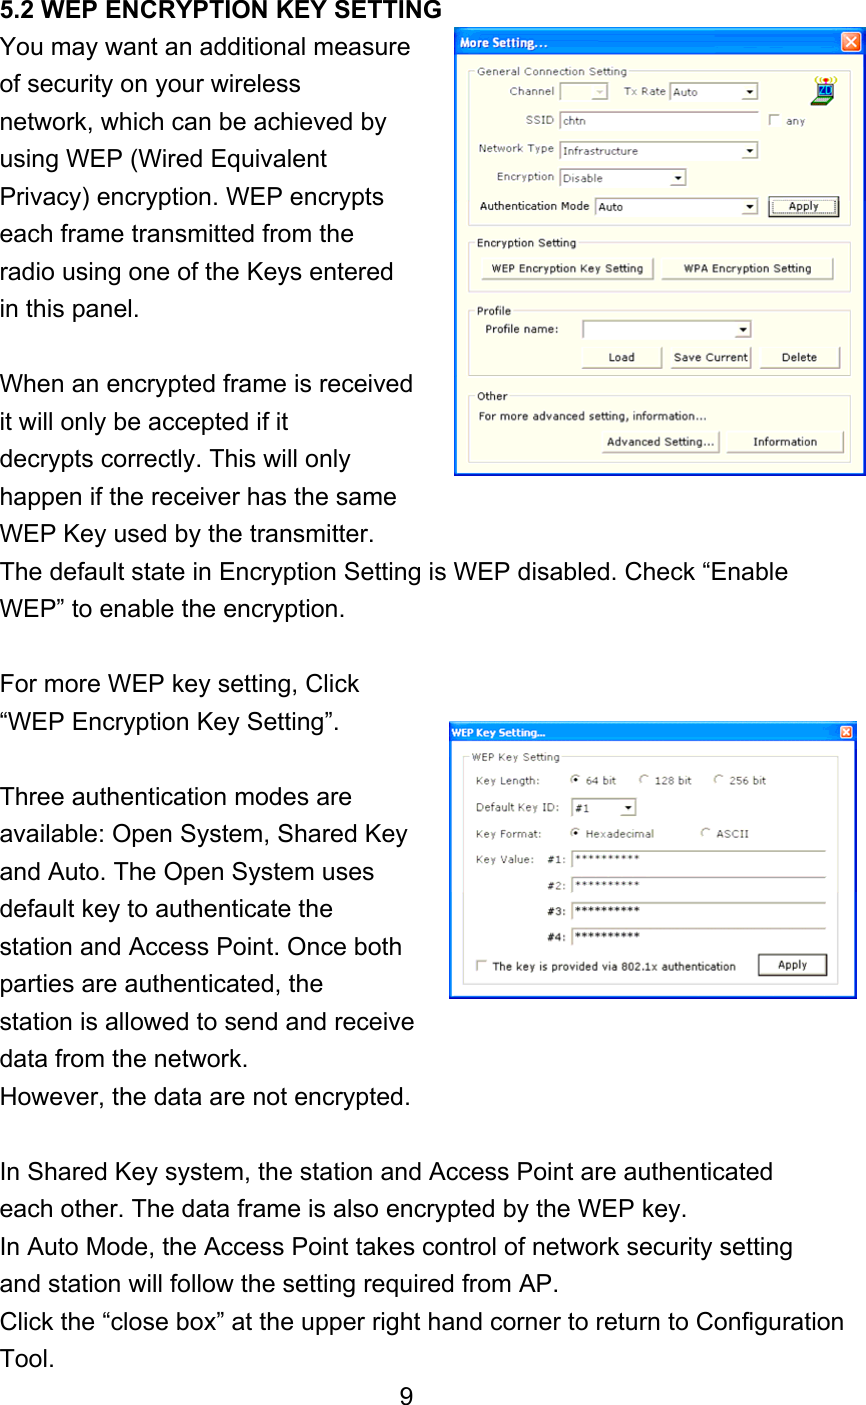 5.2 WEP ENCRYPTION KEY SETTING You may want an additional measure   of security on your wireless network, which can be achieved by using WEP (Wired Equivalent Privacy) encryption. WEP encrypts each frame transmitted from the radio using one of the Keys entered in this panel.  When an encrypted frame is received it will only be accepted if it decrypts correctly. This will only happen if the receiver has the same WEP Key used by the transmitter. The default state in Encryption Setting is WEP disabled. Check “Enable WEP” to enable the encryption.    For more WEP key setting, Click “WEP Encryption Key Setting”.  Three authentication modes are available: Open System, Shared Key and Auto. The Open System uses default key to authenticate the station and Access Point. Once both parties are authenticated, the station is allowed to send and receive data from the network. However, the data are not encrypted.  In Shared Key system, the station and Access Point are authenticated each other. The data frame is also encrypted by the WEP key. In Auto Mode, the Access Point takes control of network security setting and station will follow the setting required from AP. Click the “close box” at the upper right hand corner to return to Configuration Tool. 9 